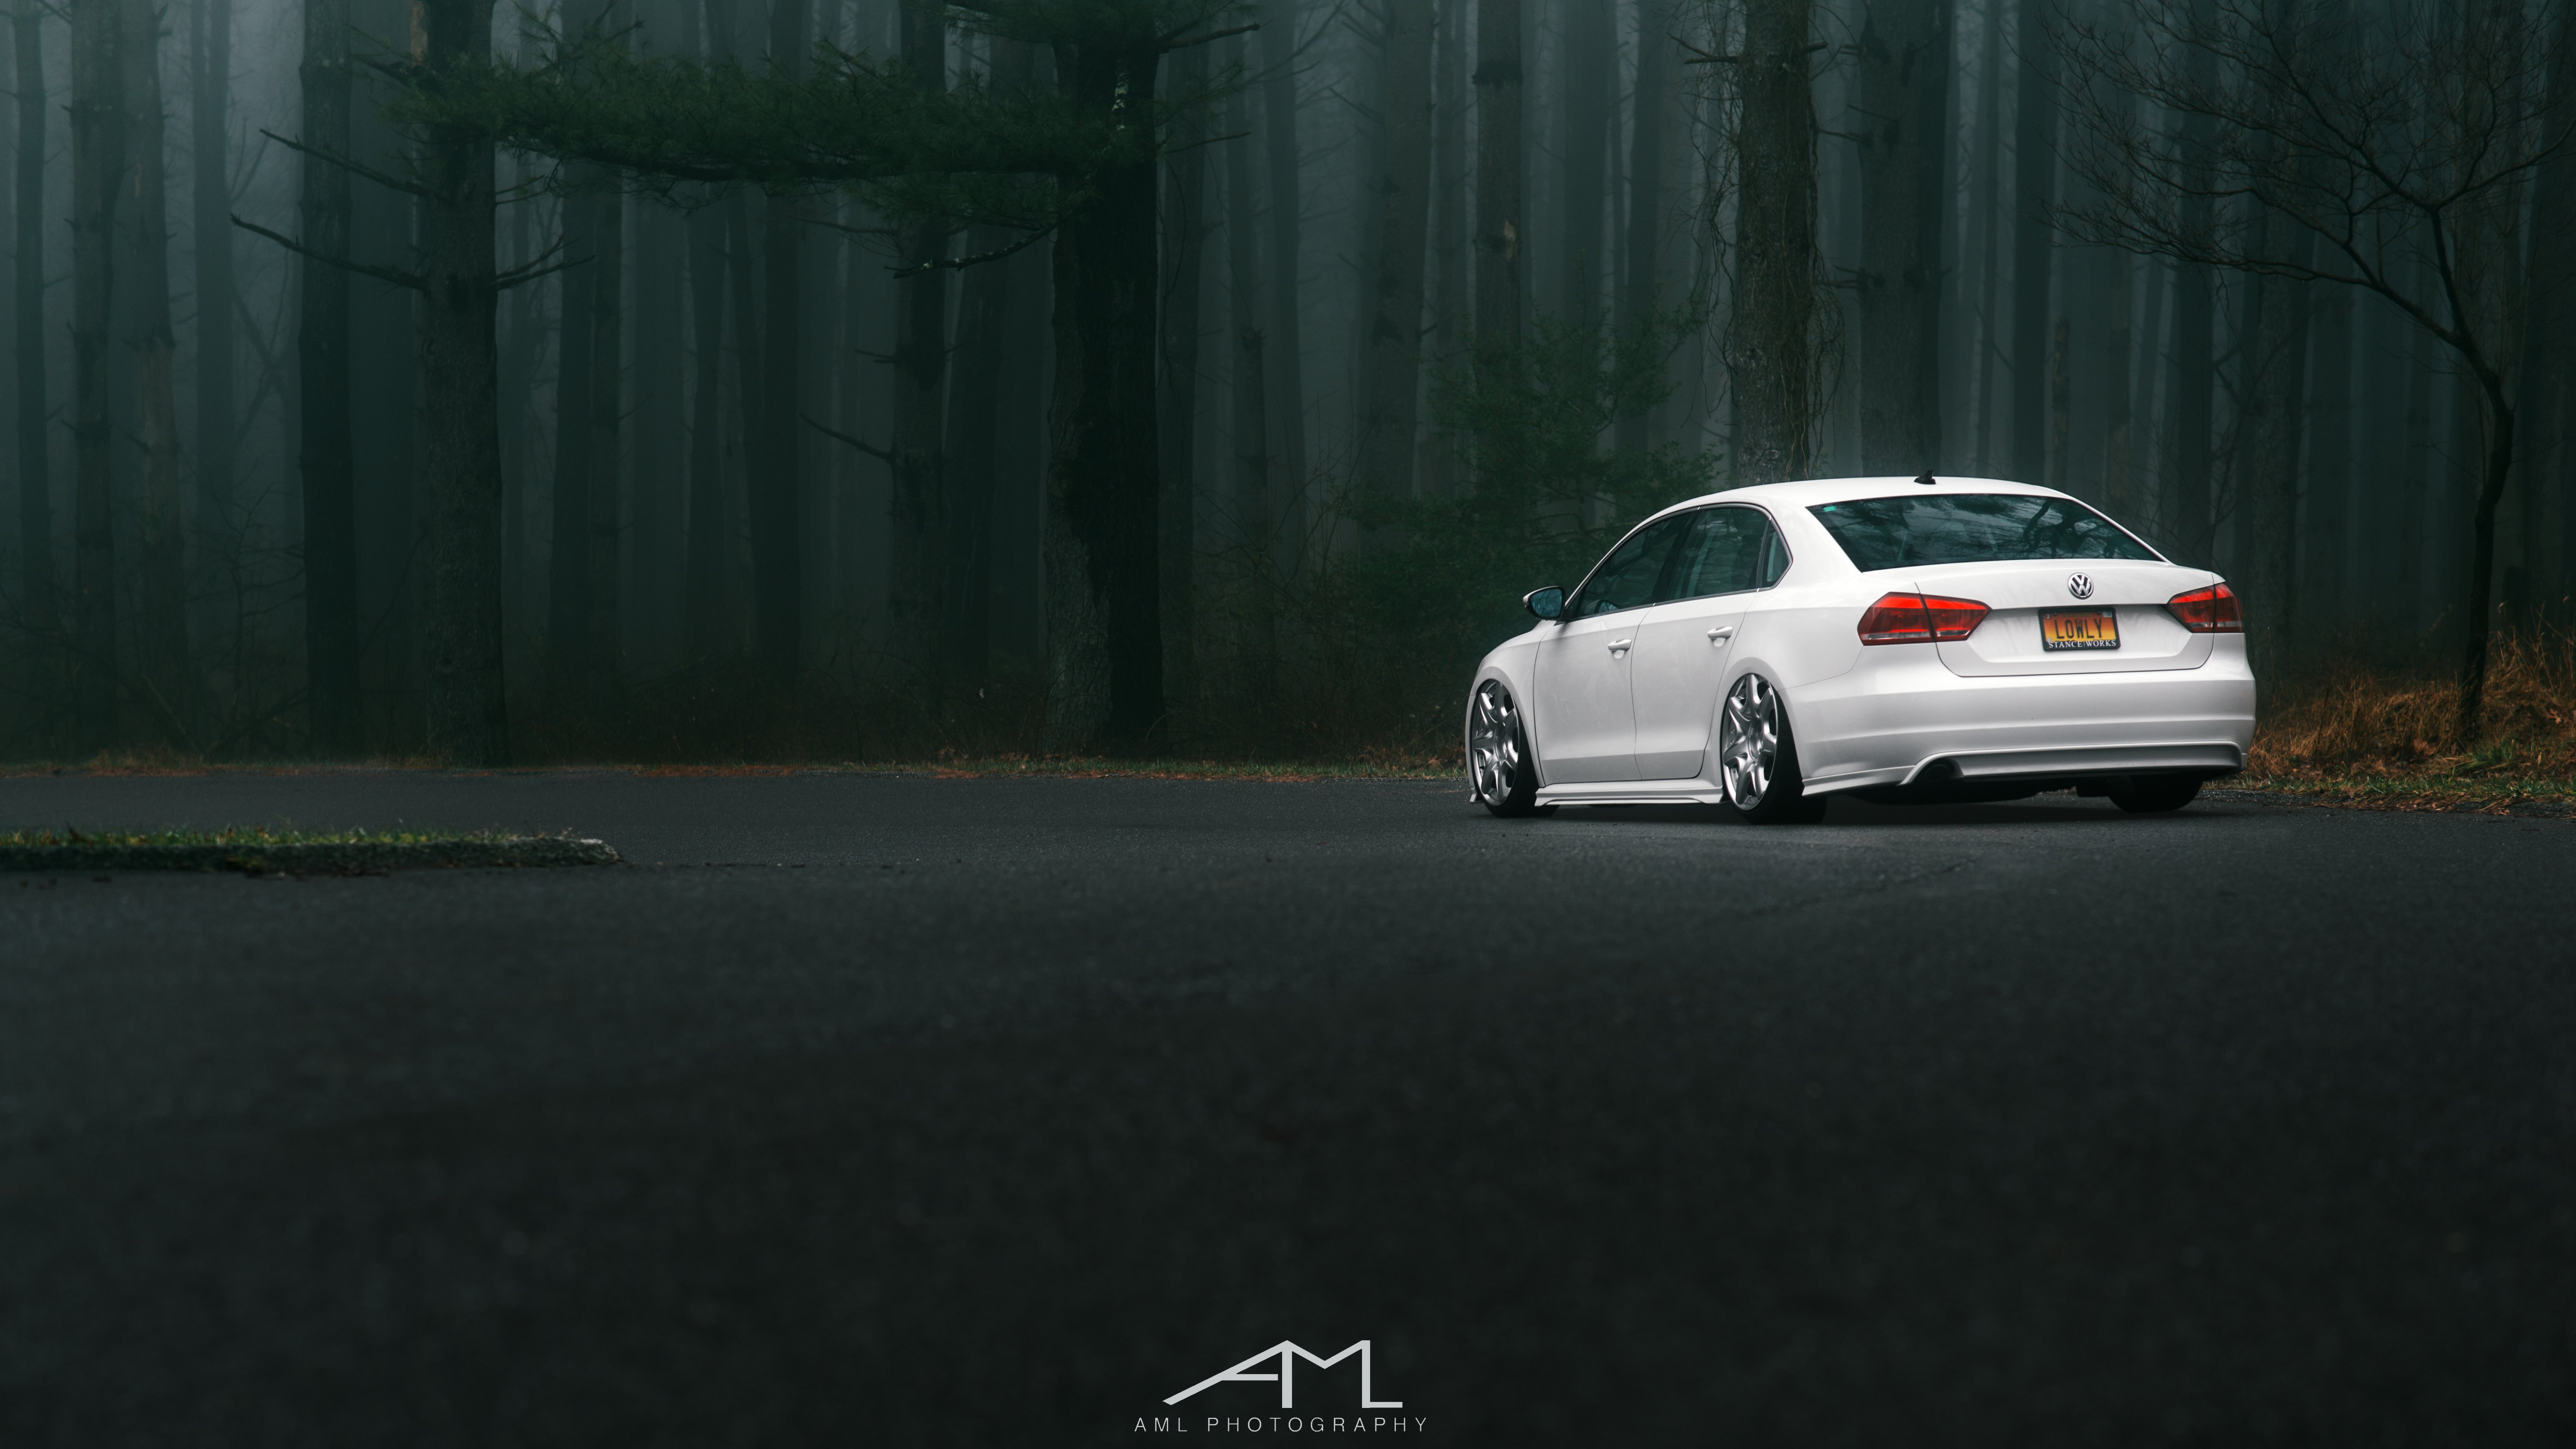 White Lowered VW Passat with Custom Rear Diffuser - Photo by Arlen Liverman